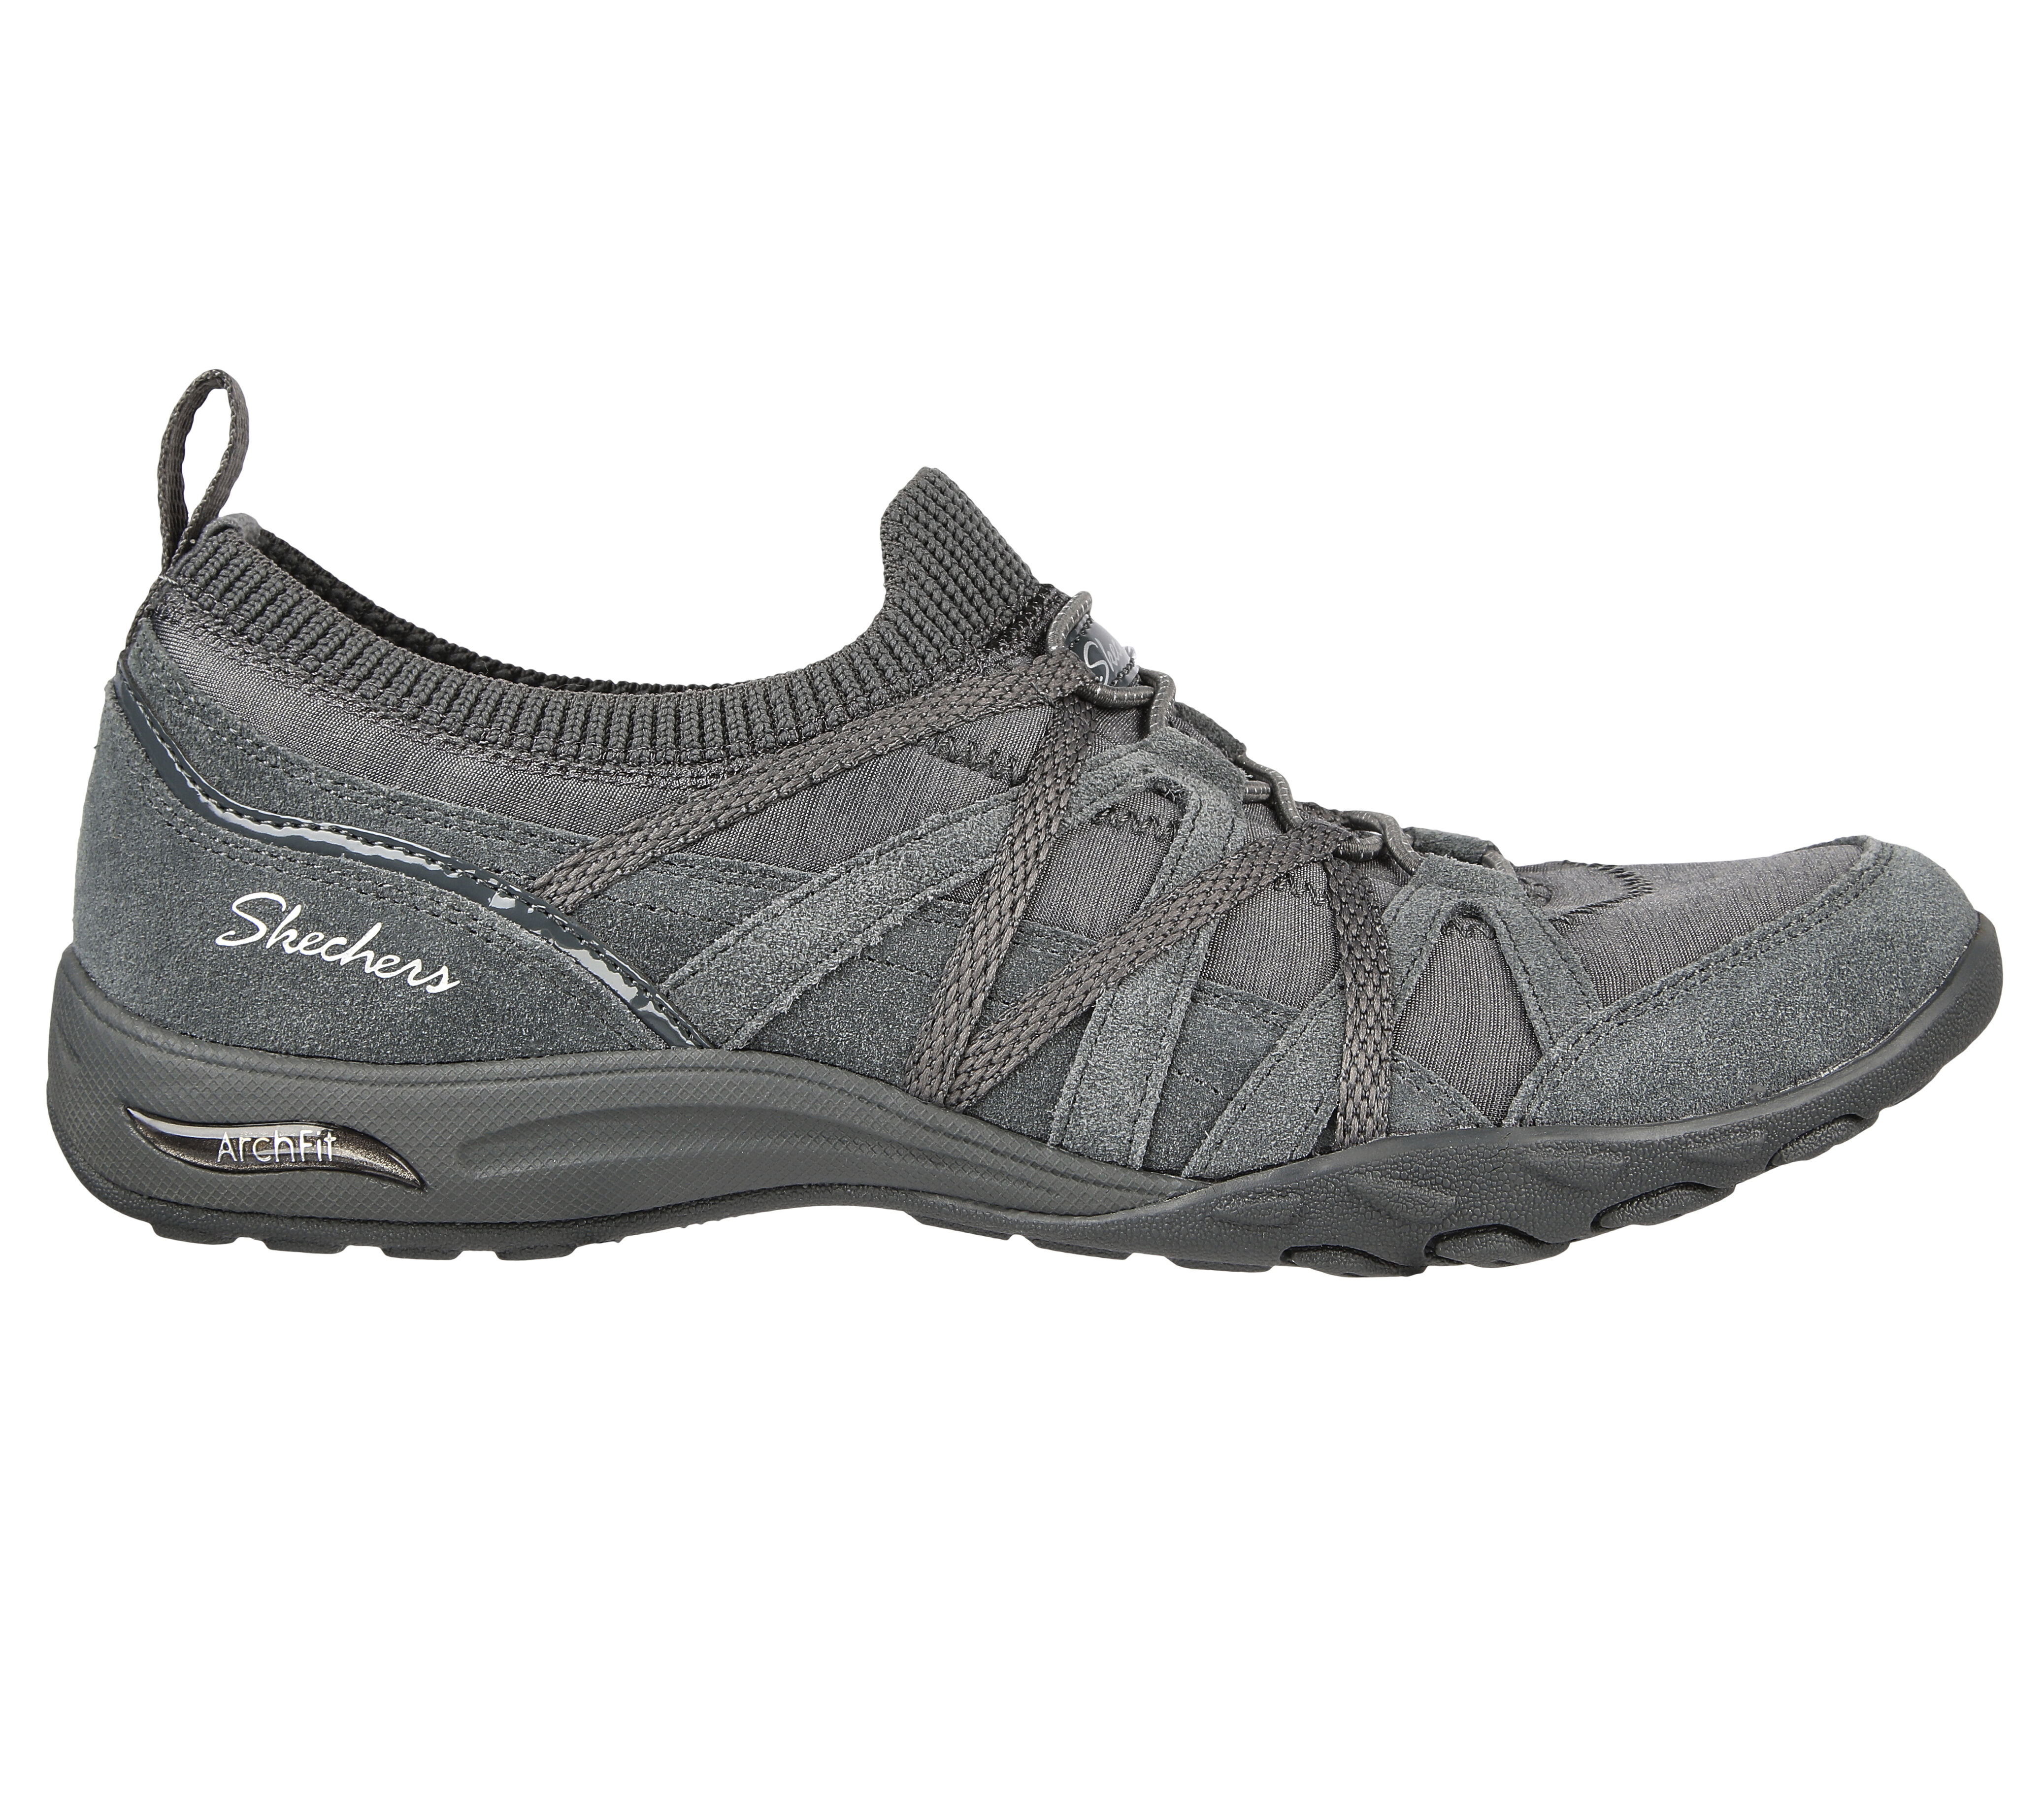 Shop Women's Relaxed Fit Shoes | SKECHERS